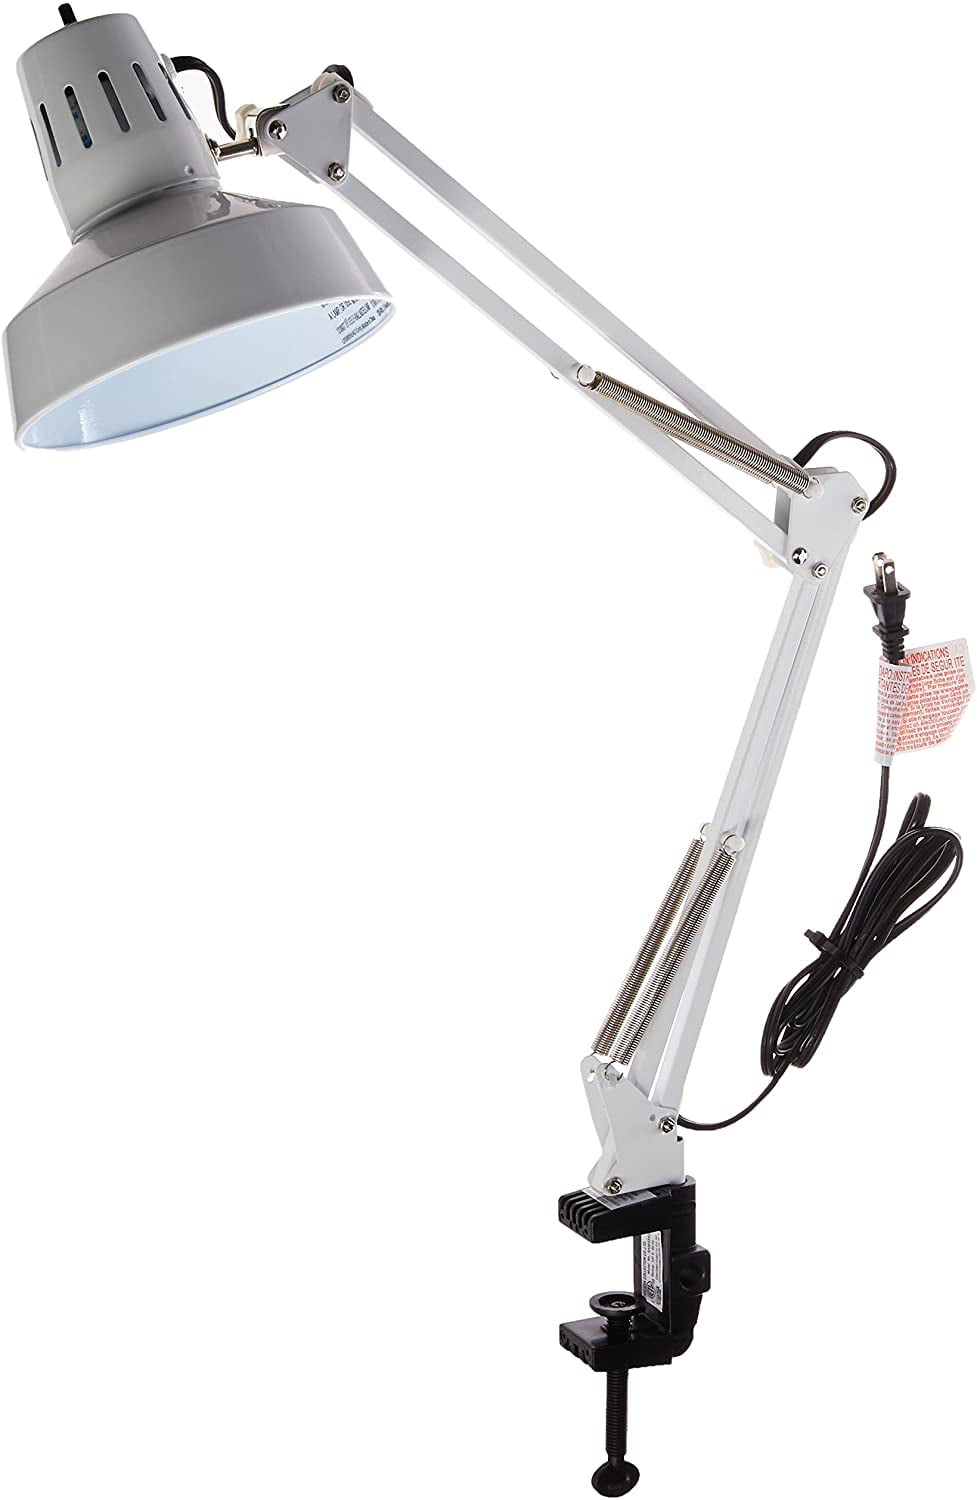 Swing Arm Drafting Table Desk Lamp, Adjustable Clamp Drafting Table Lamps